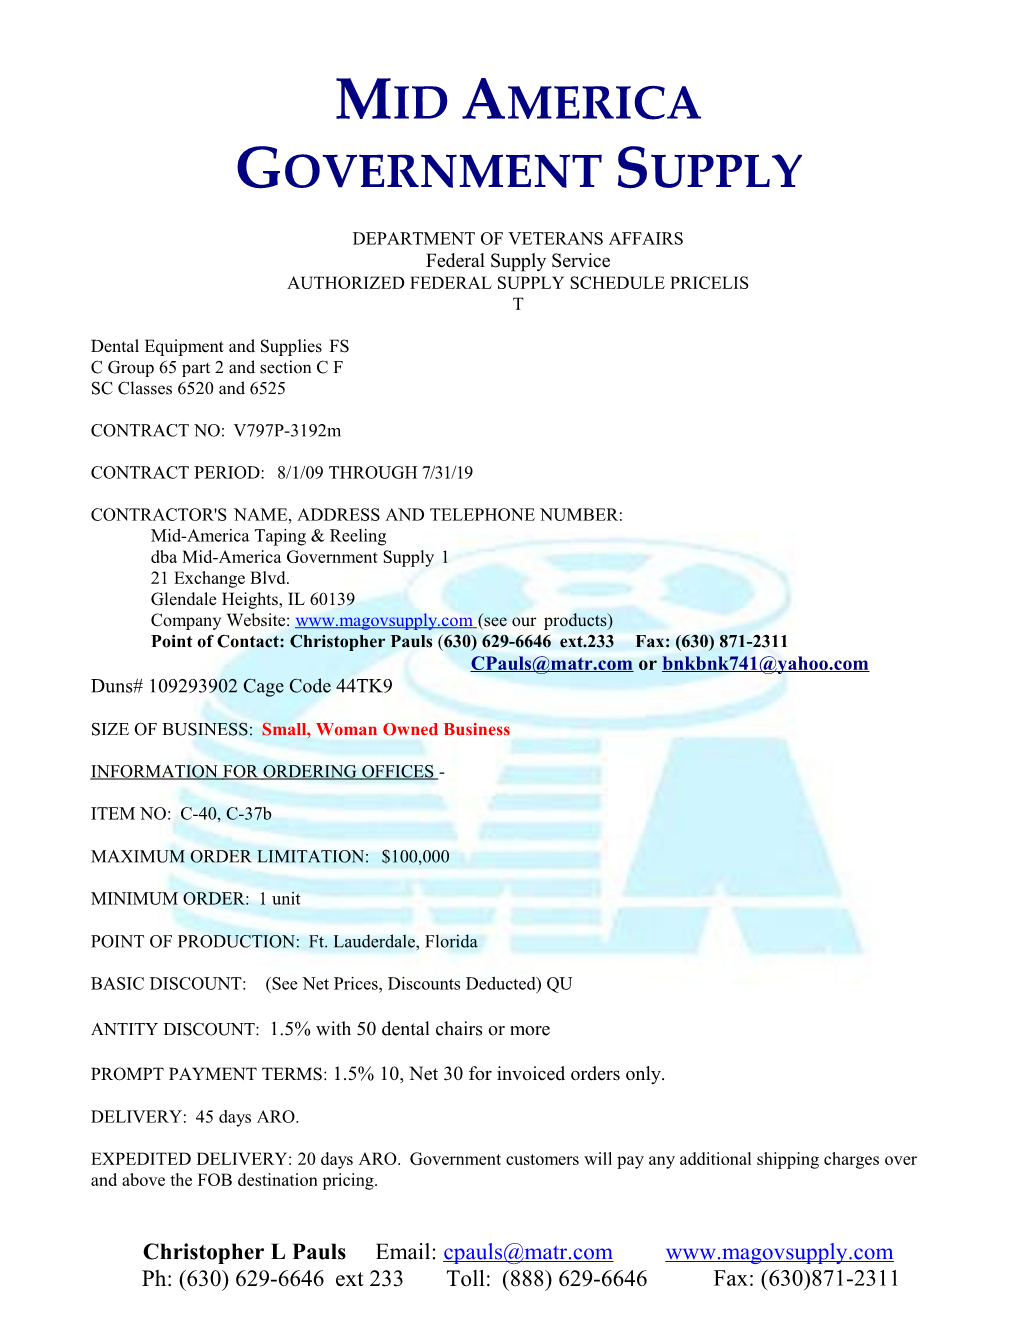 Authorized Federal Supply Schedule Pricelist s1